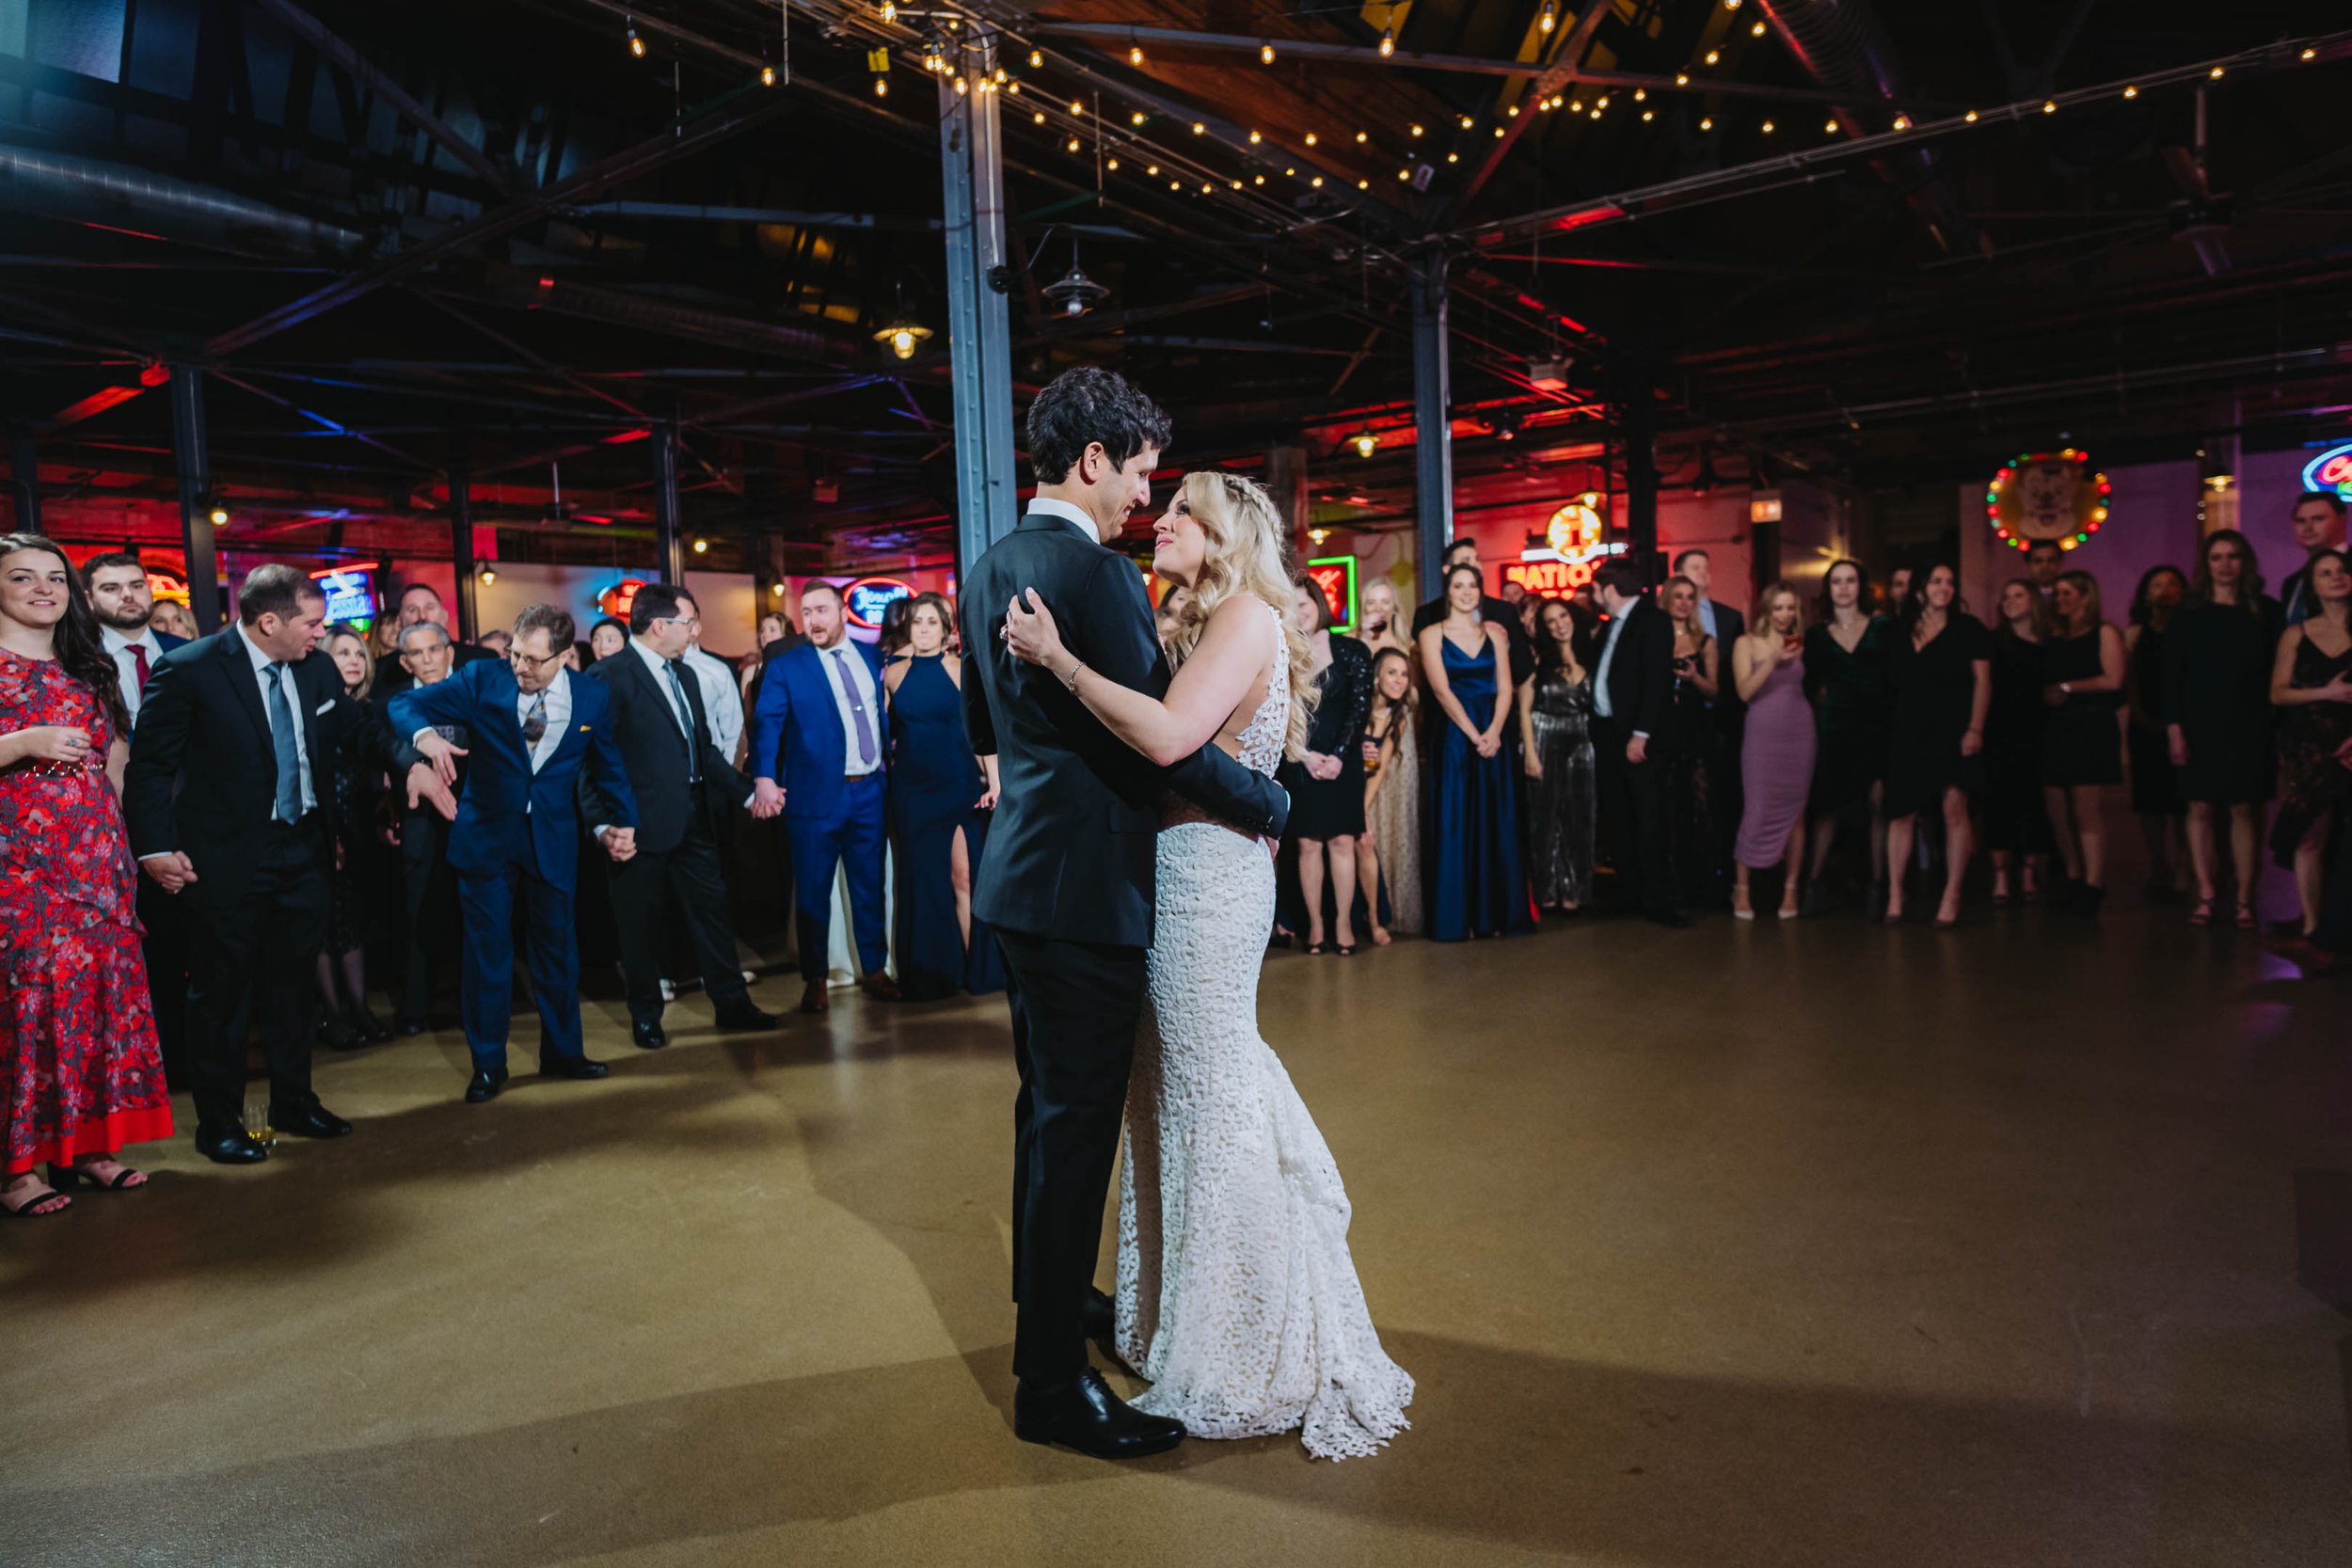 Chicago Wedding Photographer | Ravenswood Event Center | J. Brown Photography | bride and groom first dance